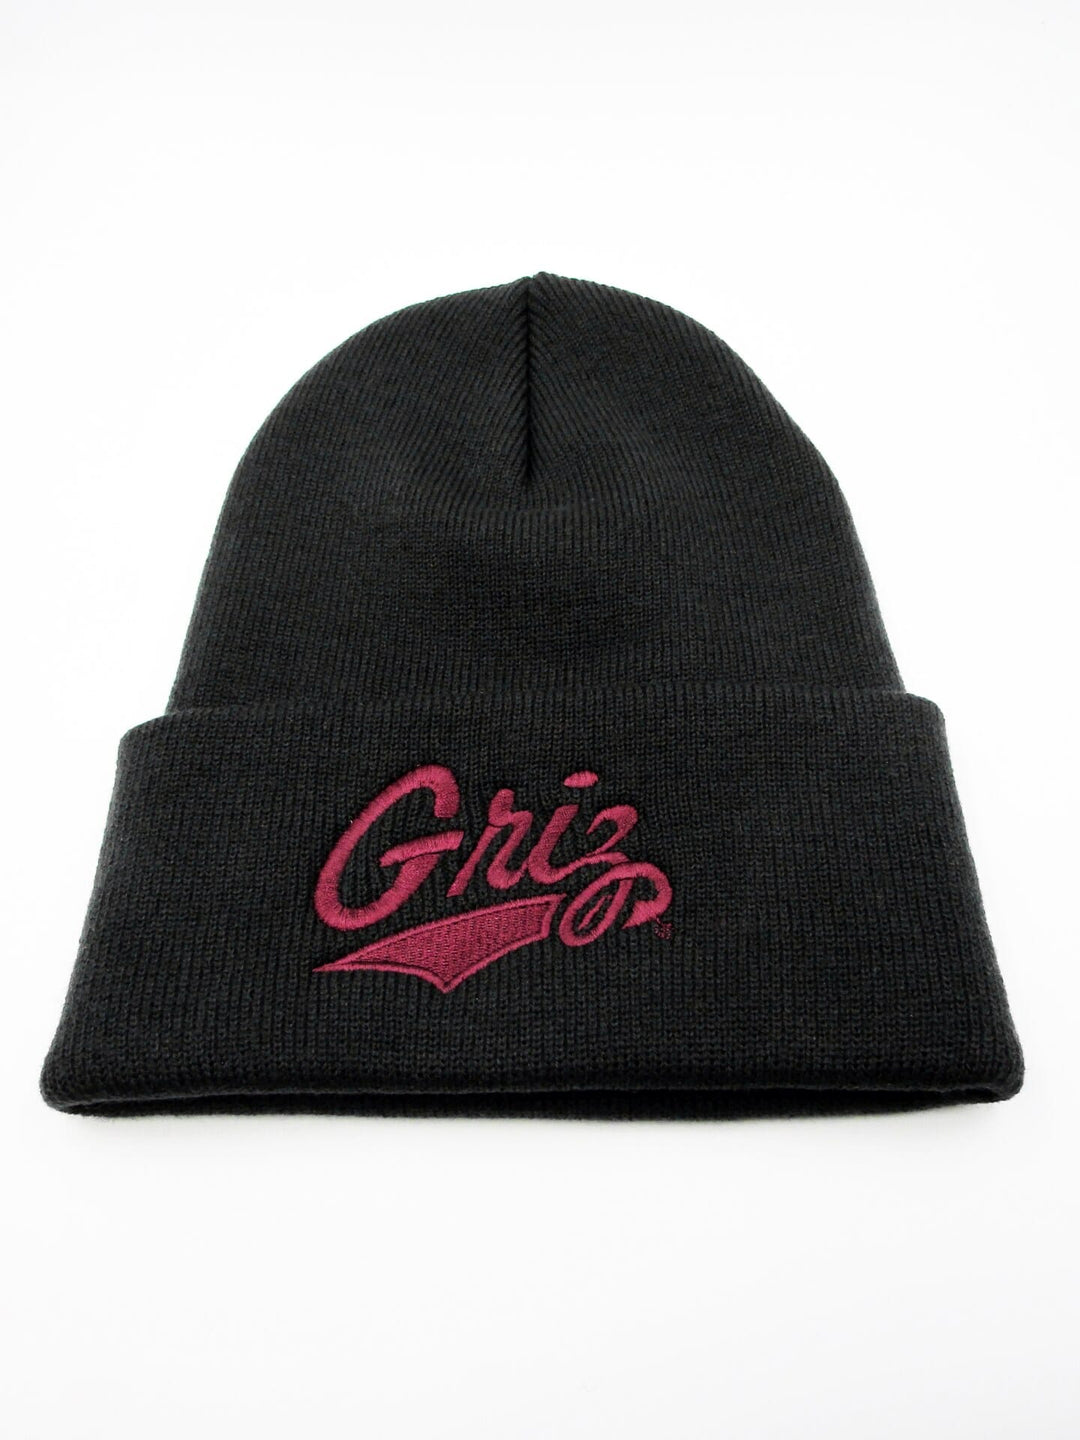 Blue Peaks Creative's black Knit Beanie embroidered with the Griz Script design in maroon